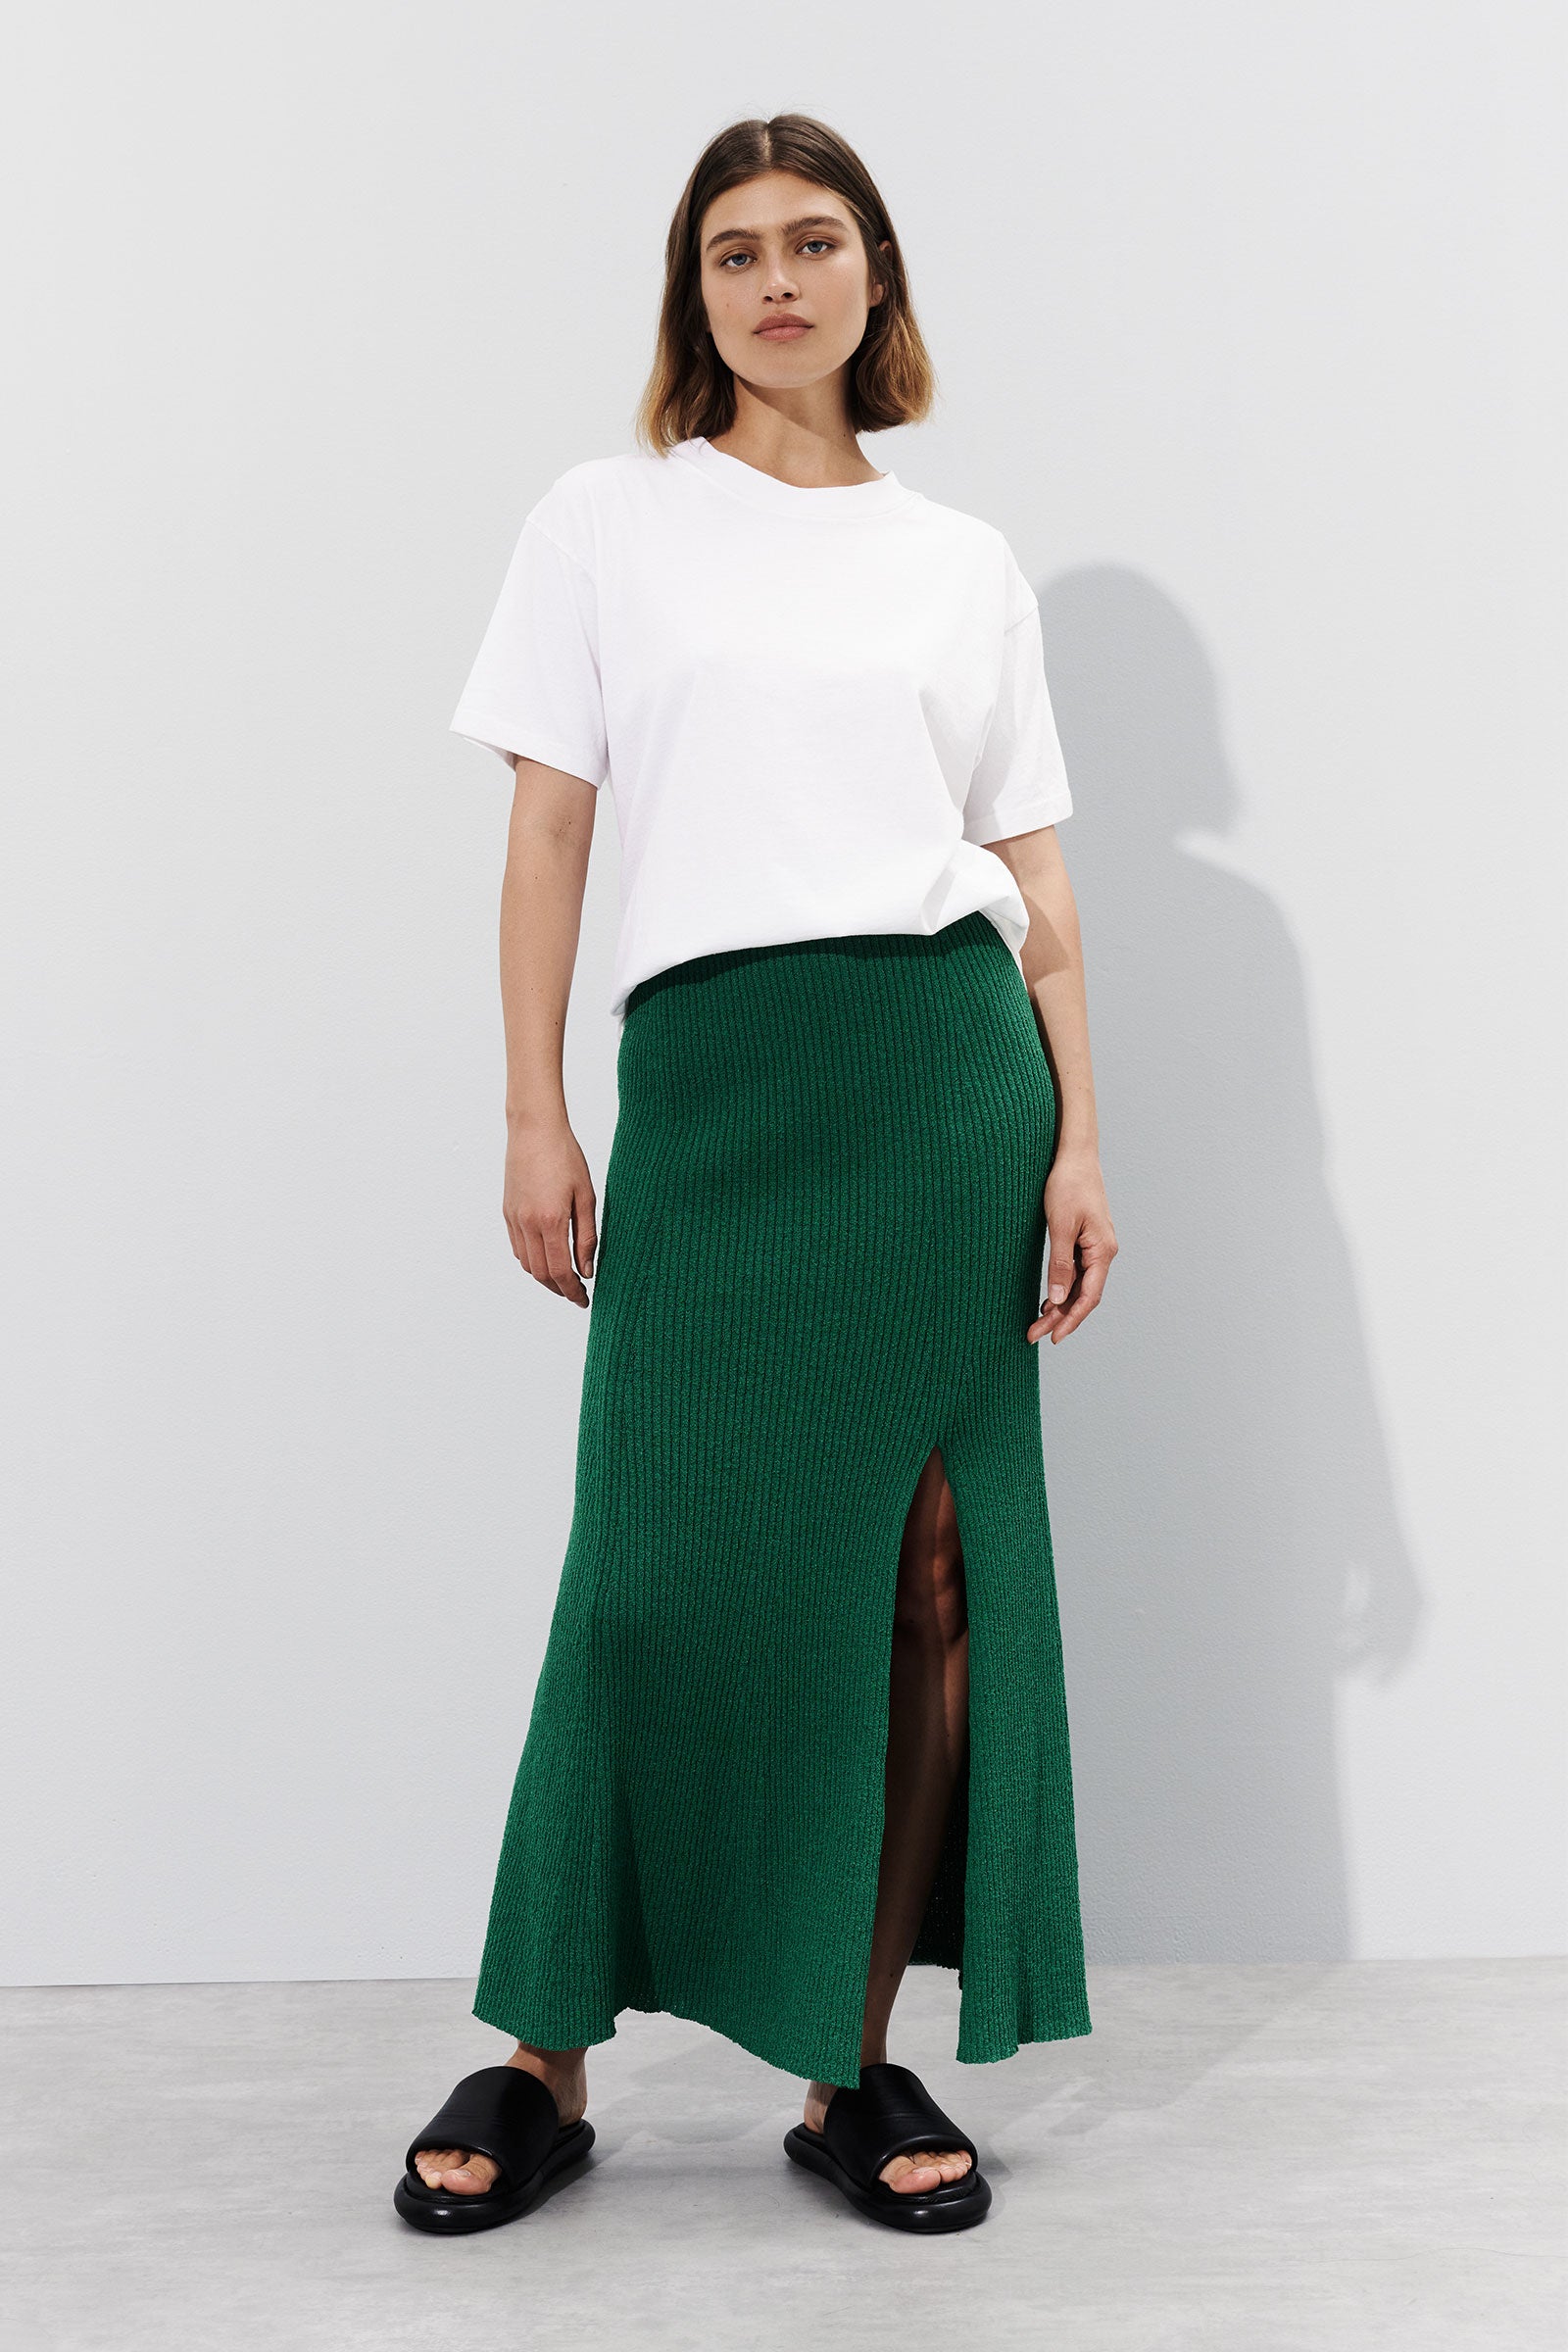 Nude Lucy Dune Knit Skirt In a Green Lotus Colour